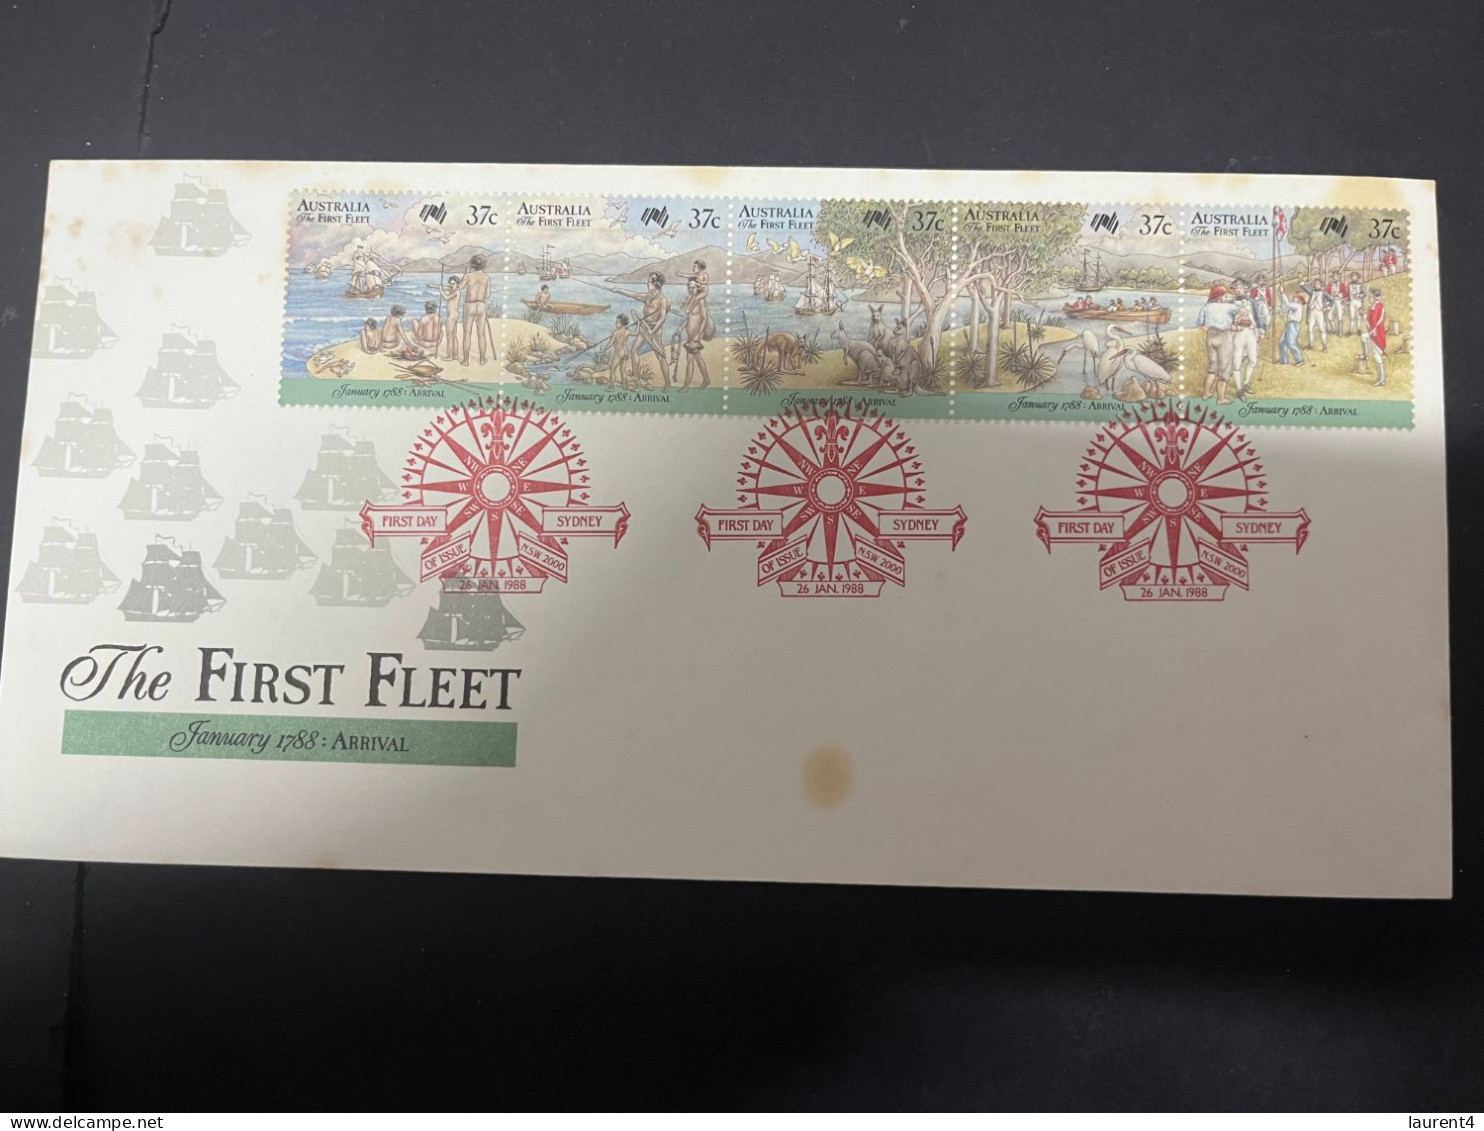 4-5-2024 (4 Z 9)  Australia FDC (2 Covers) The First Fleet (as Seen On Scans) - FDC